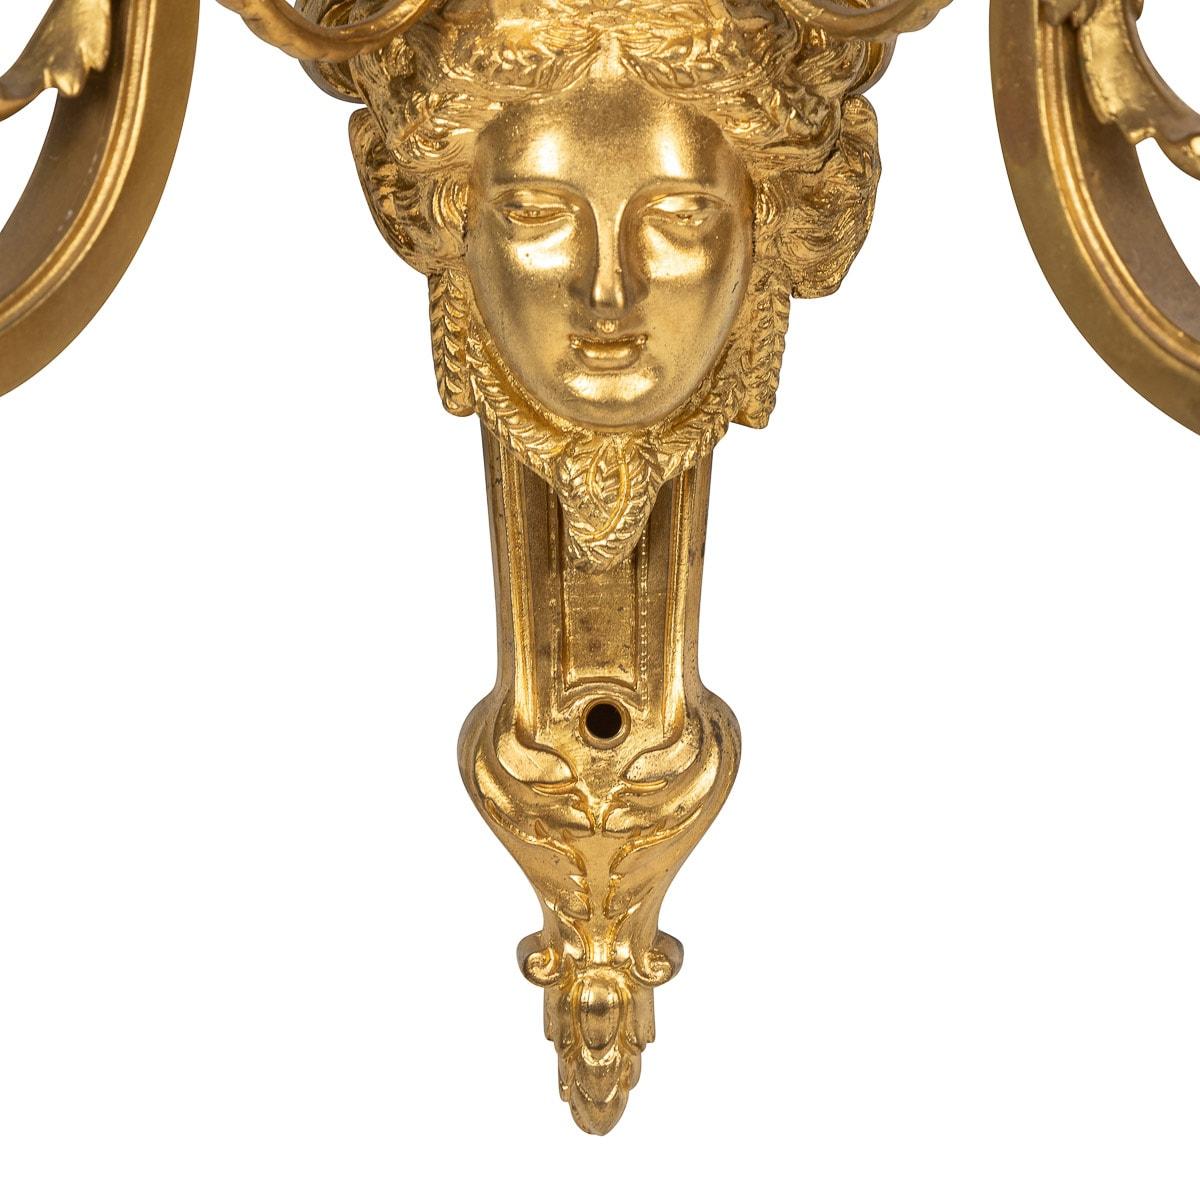 19th Century French Régence Style Ormolu D'appliques Wall Lights, C.1830 For Sale 4